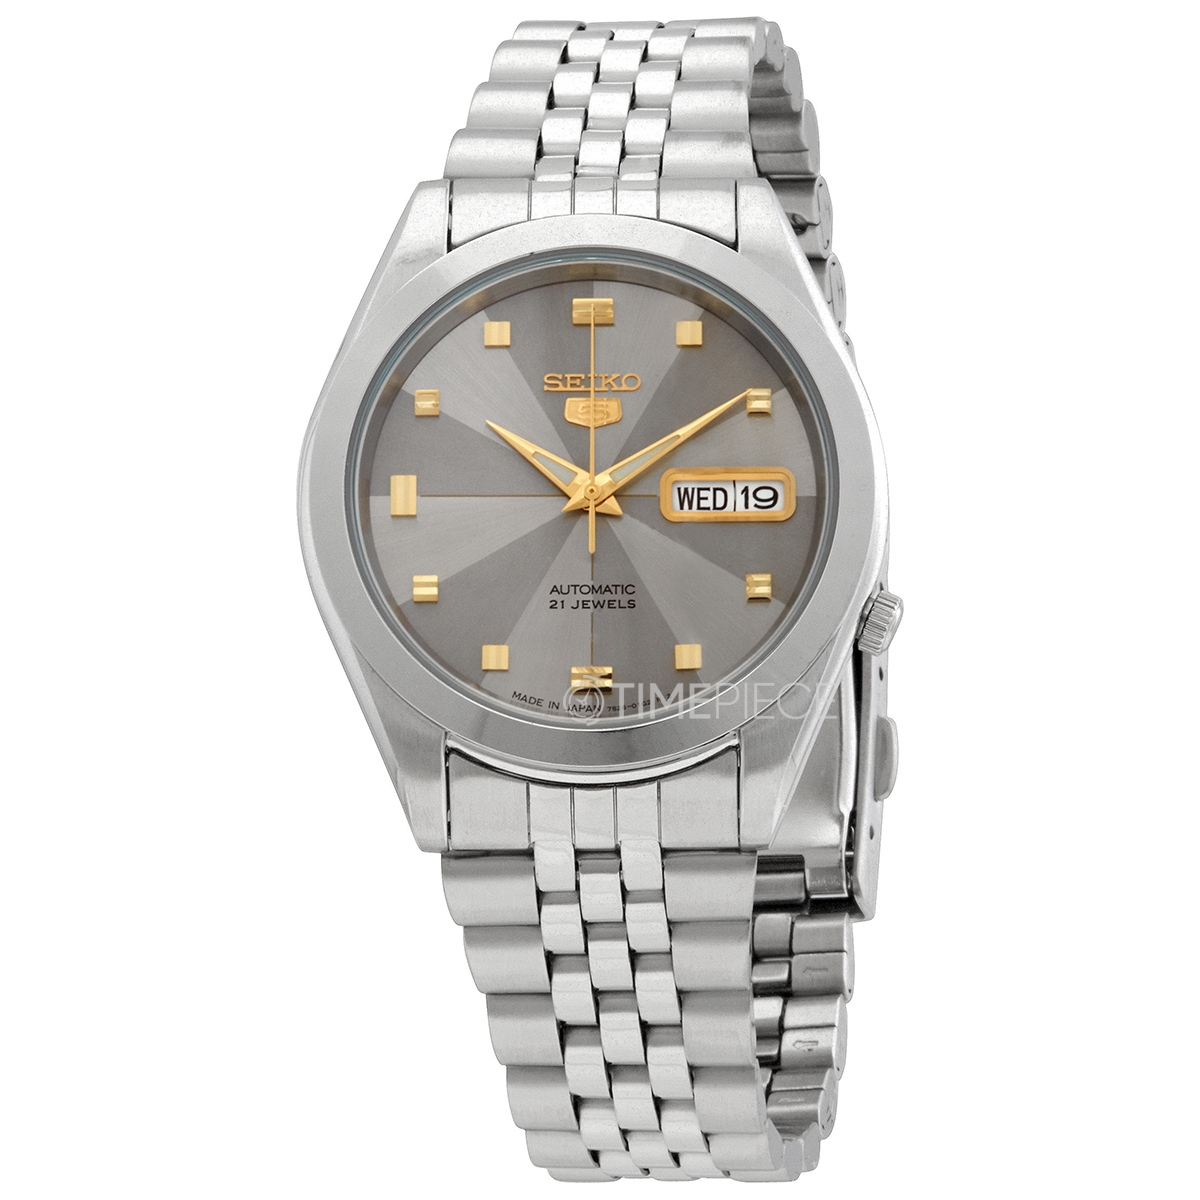 SEIKO 5 Automatic Mens Watch Grey and Gold SNKL19J1 with Silver-tone Band